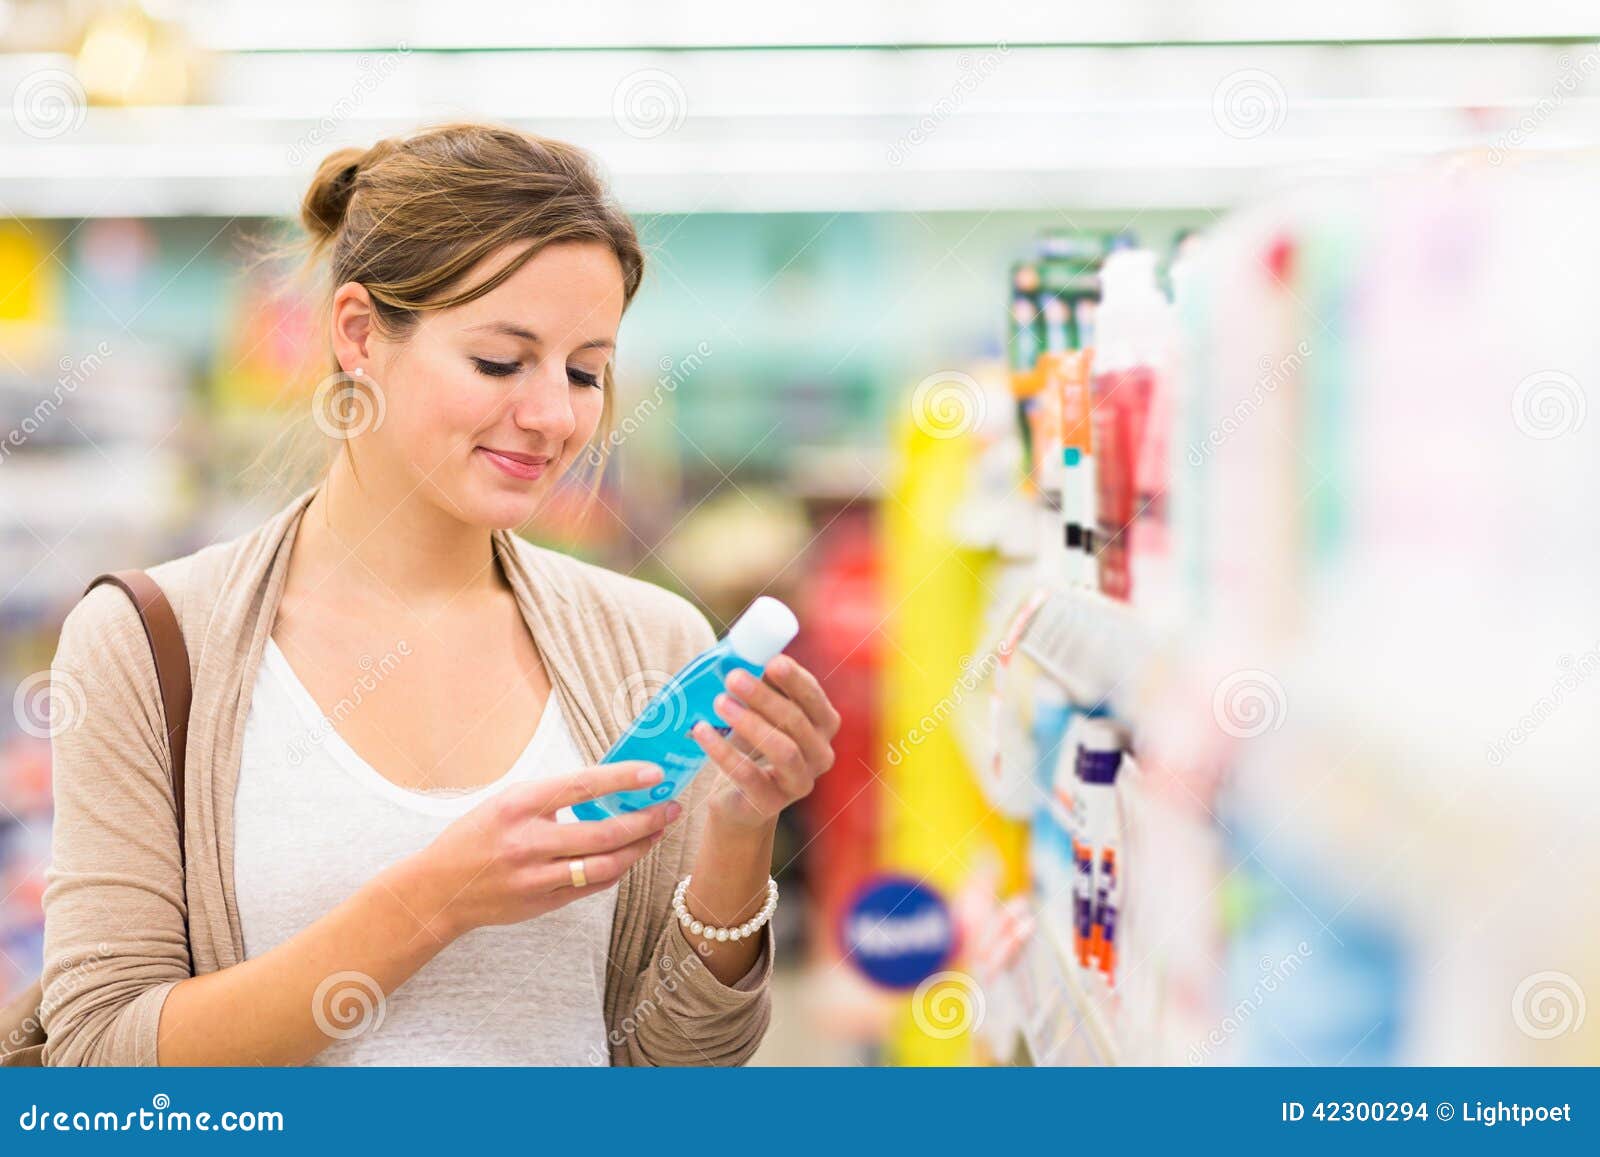 beautiful young woman shopping for cosmetics in a grocery store